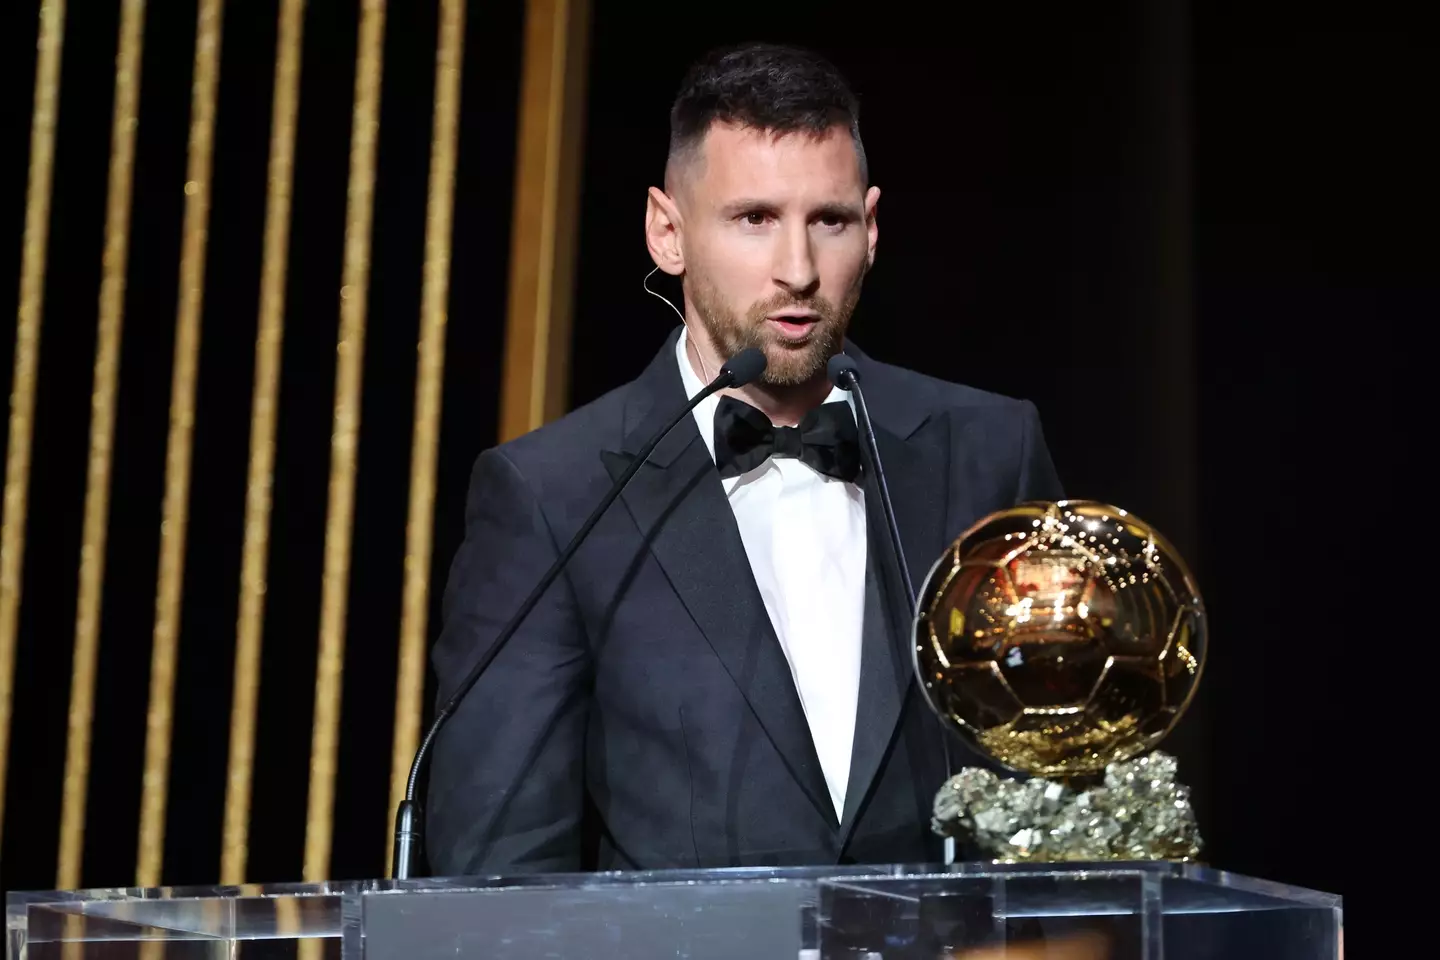 Lionel Messi on stage as he wins the Ballon d'Or award. Image: Getty 